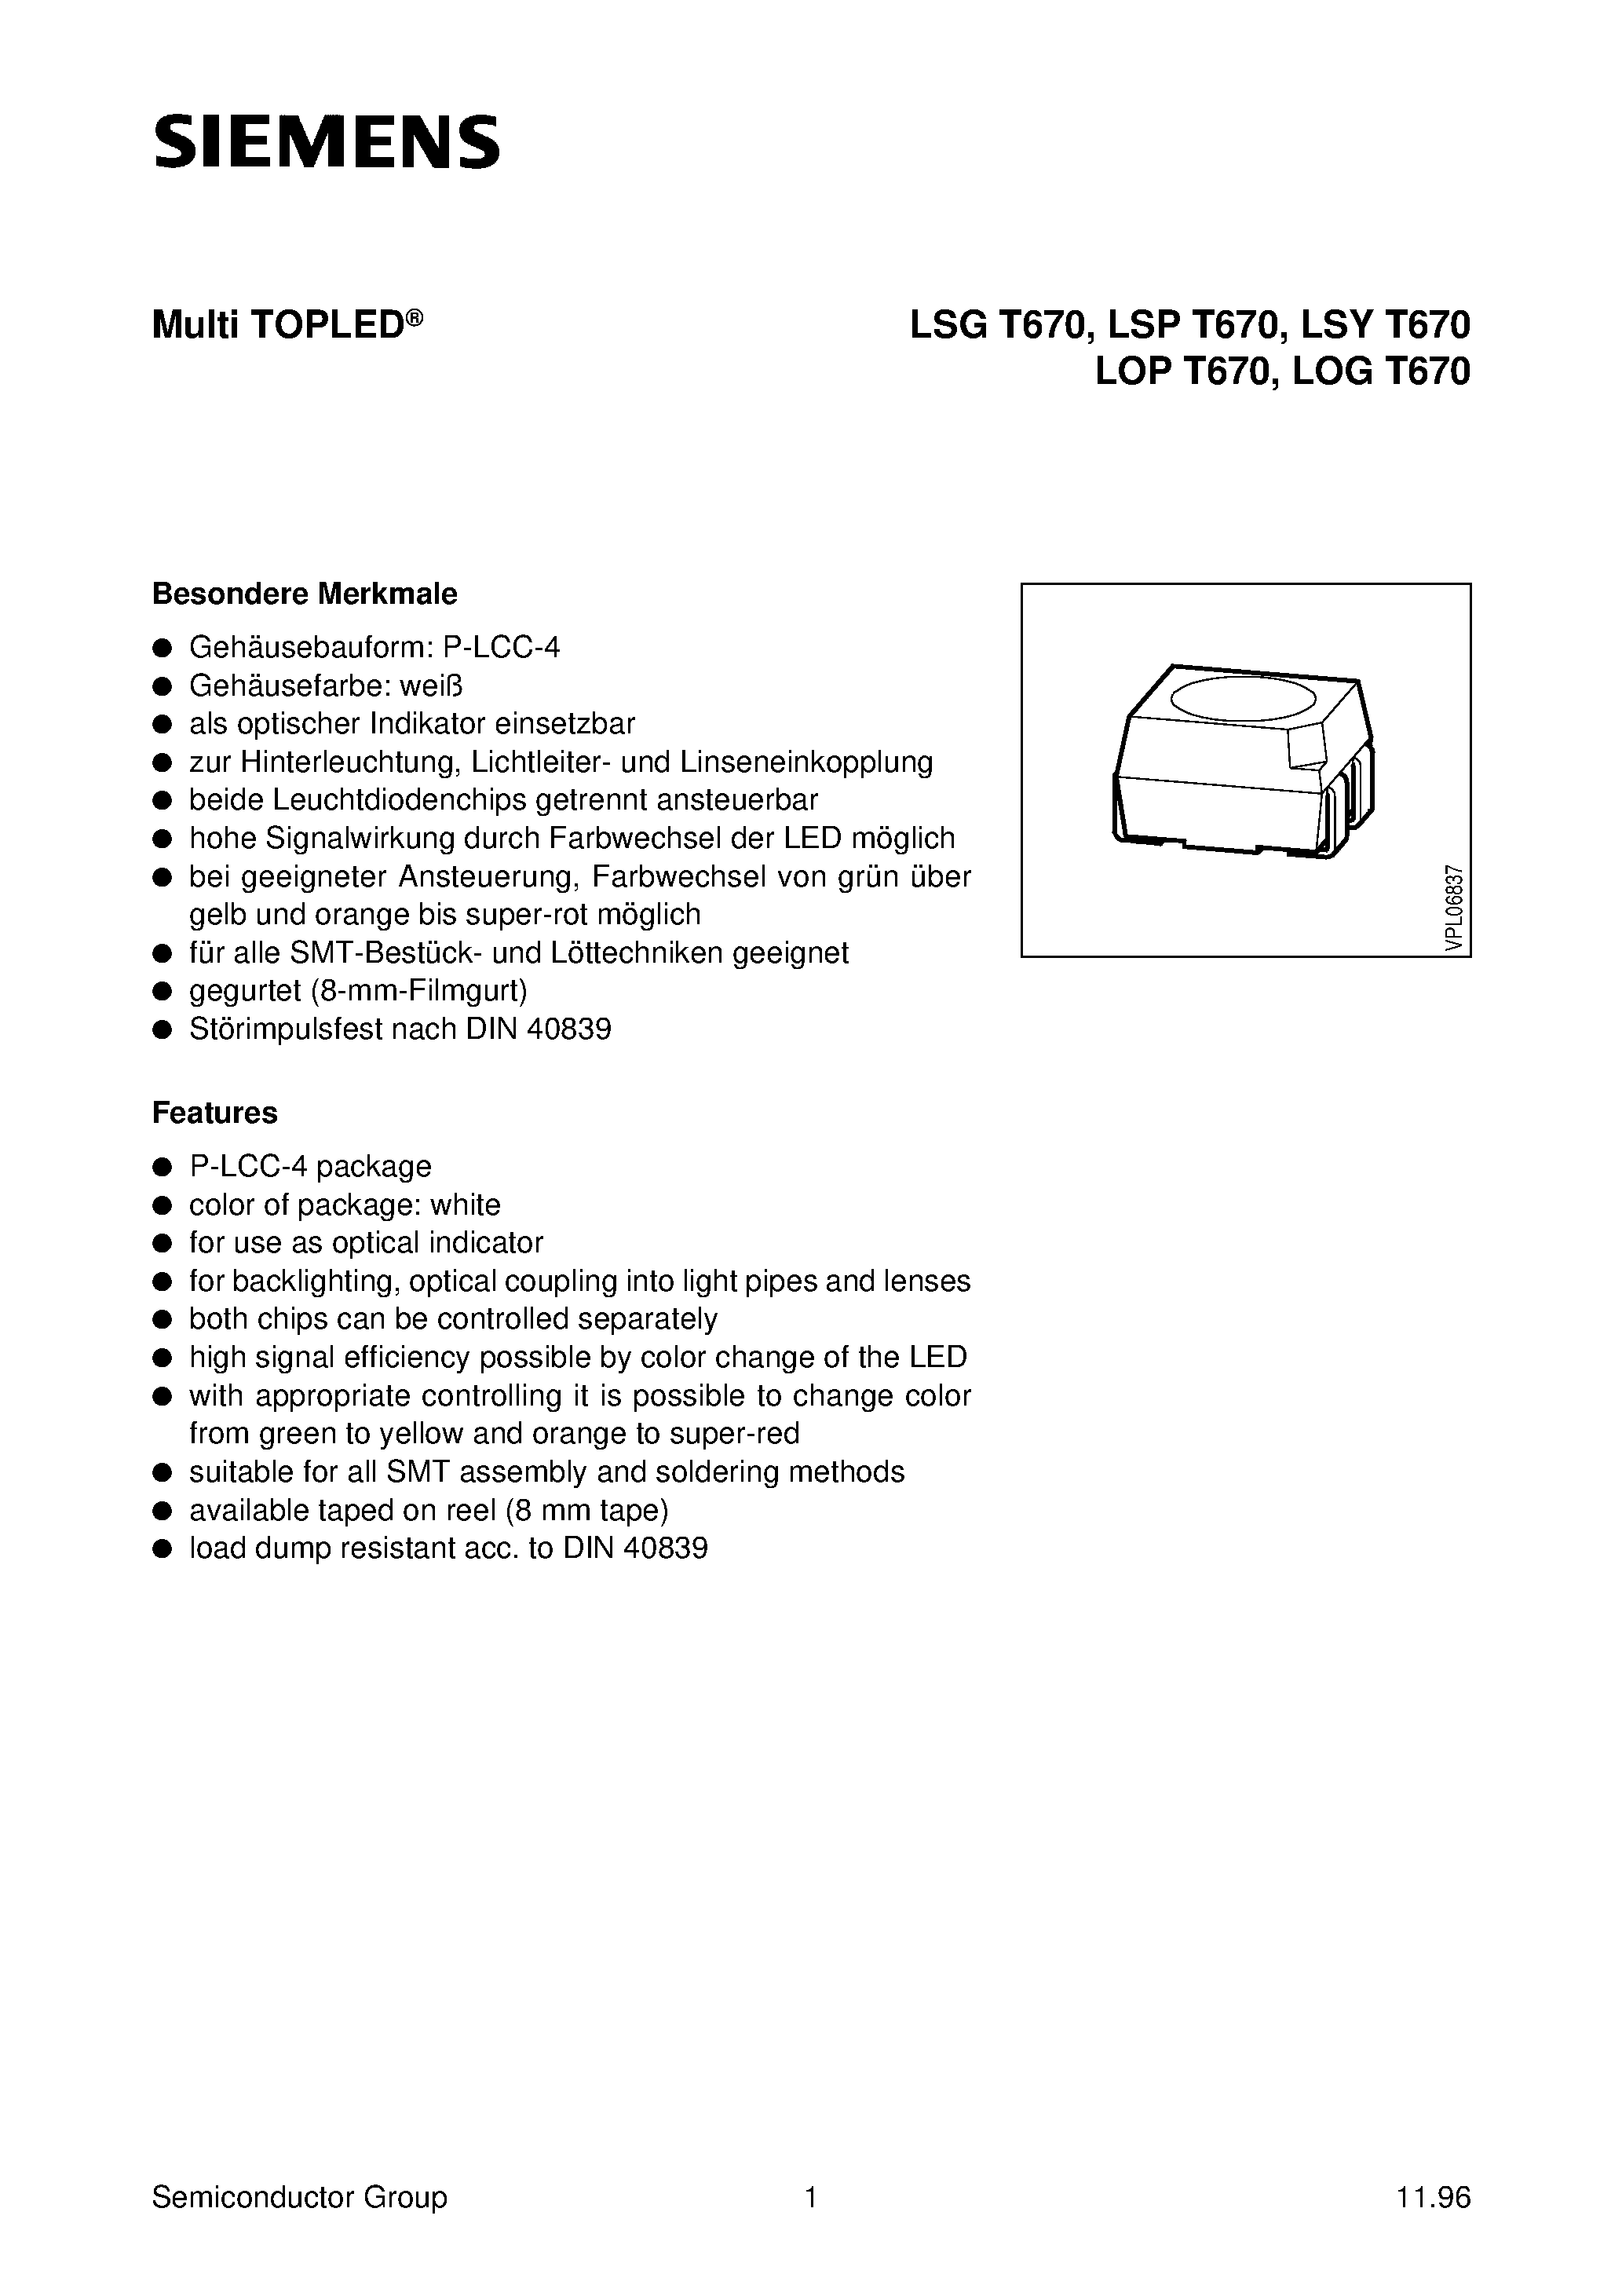 Datasheet LSGT670-K - Multi TOPLED page 1